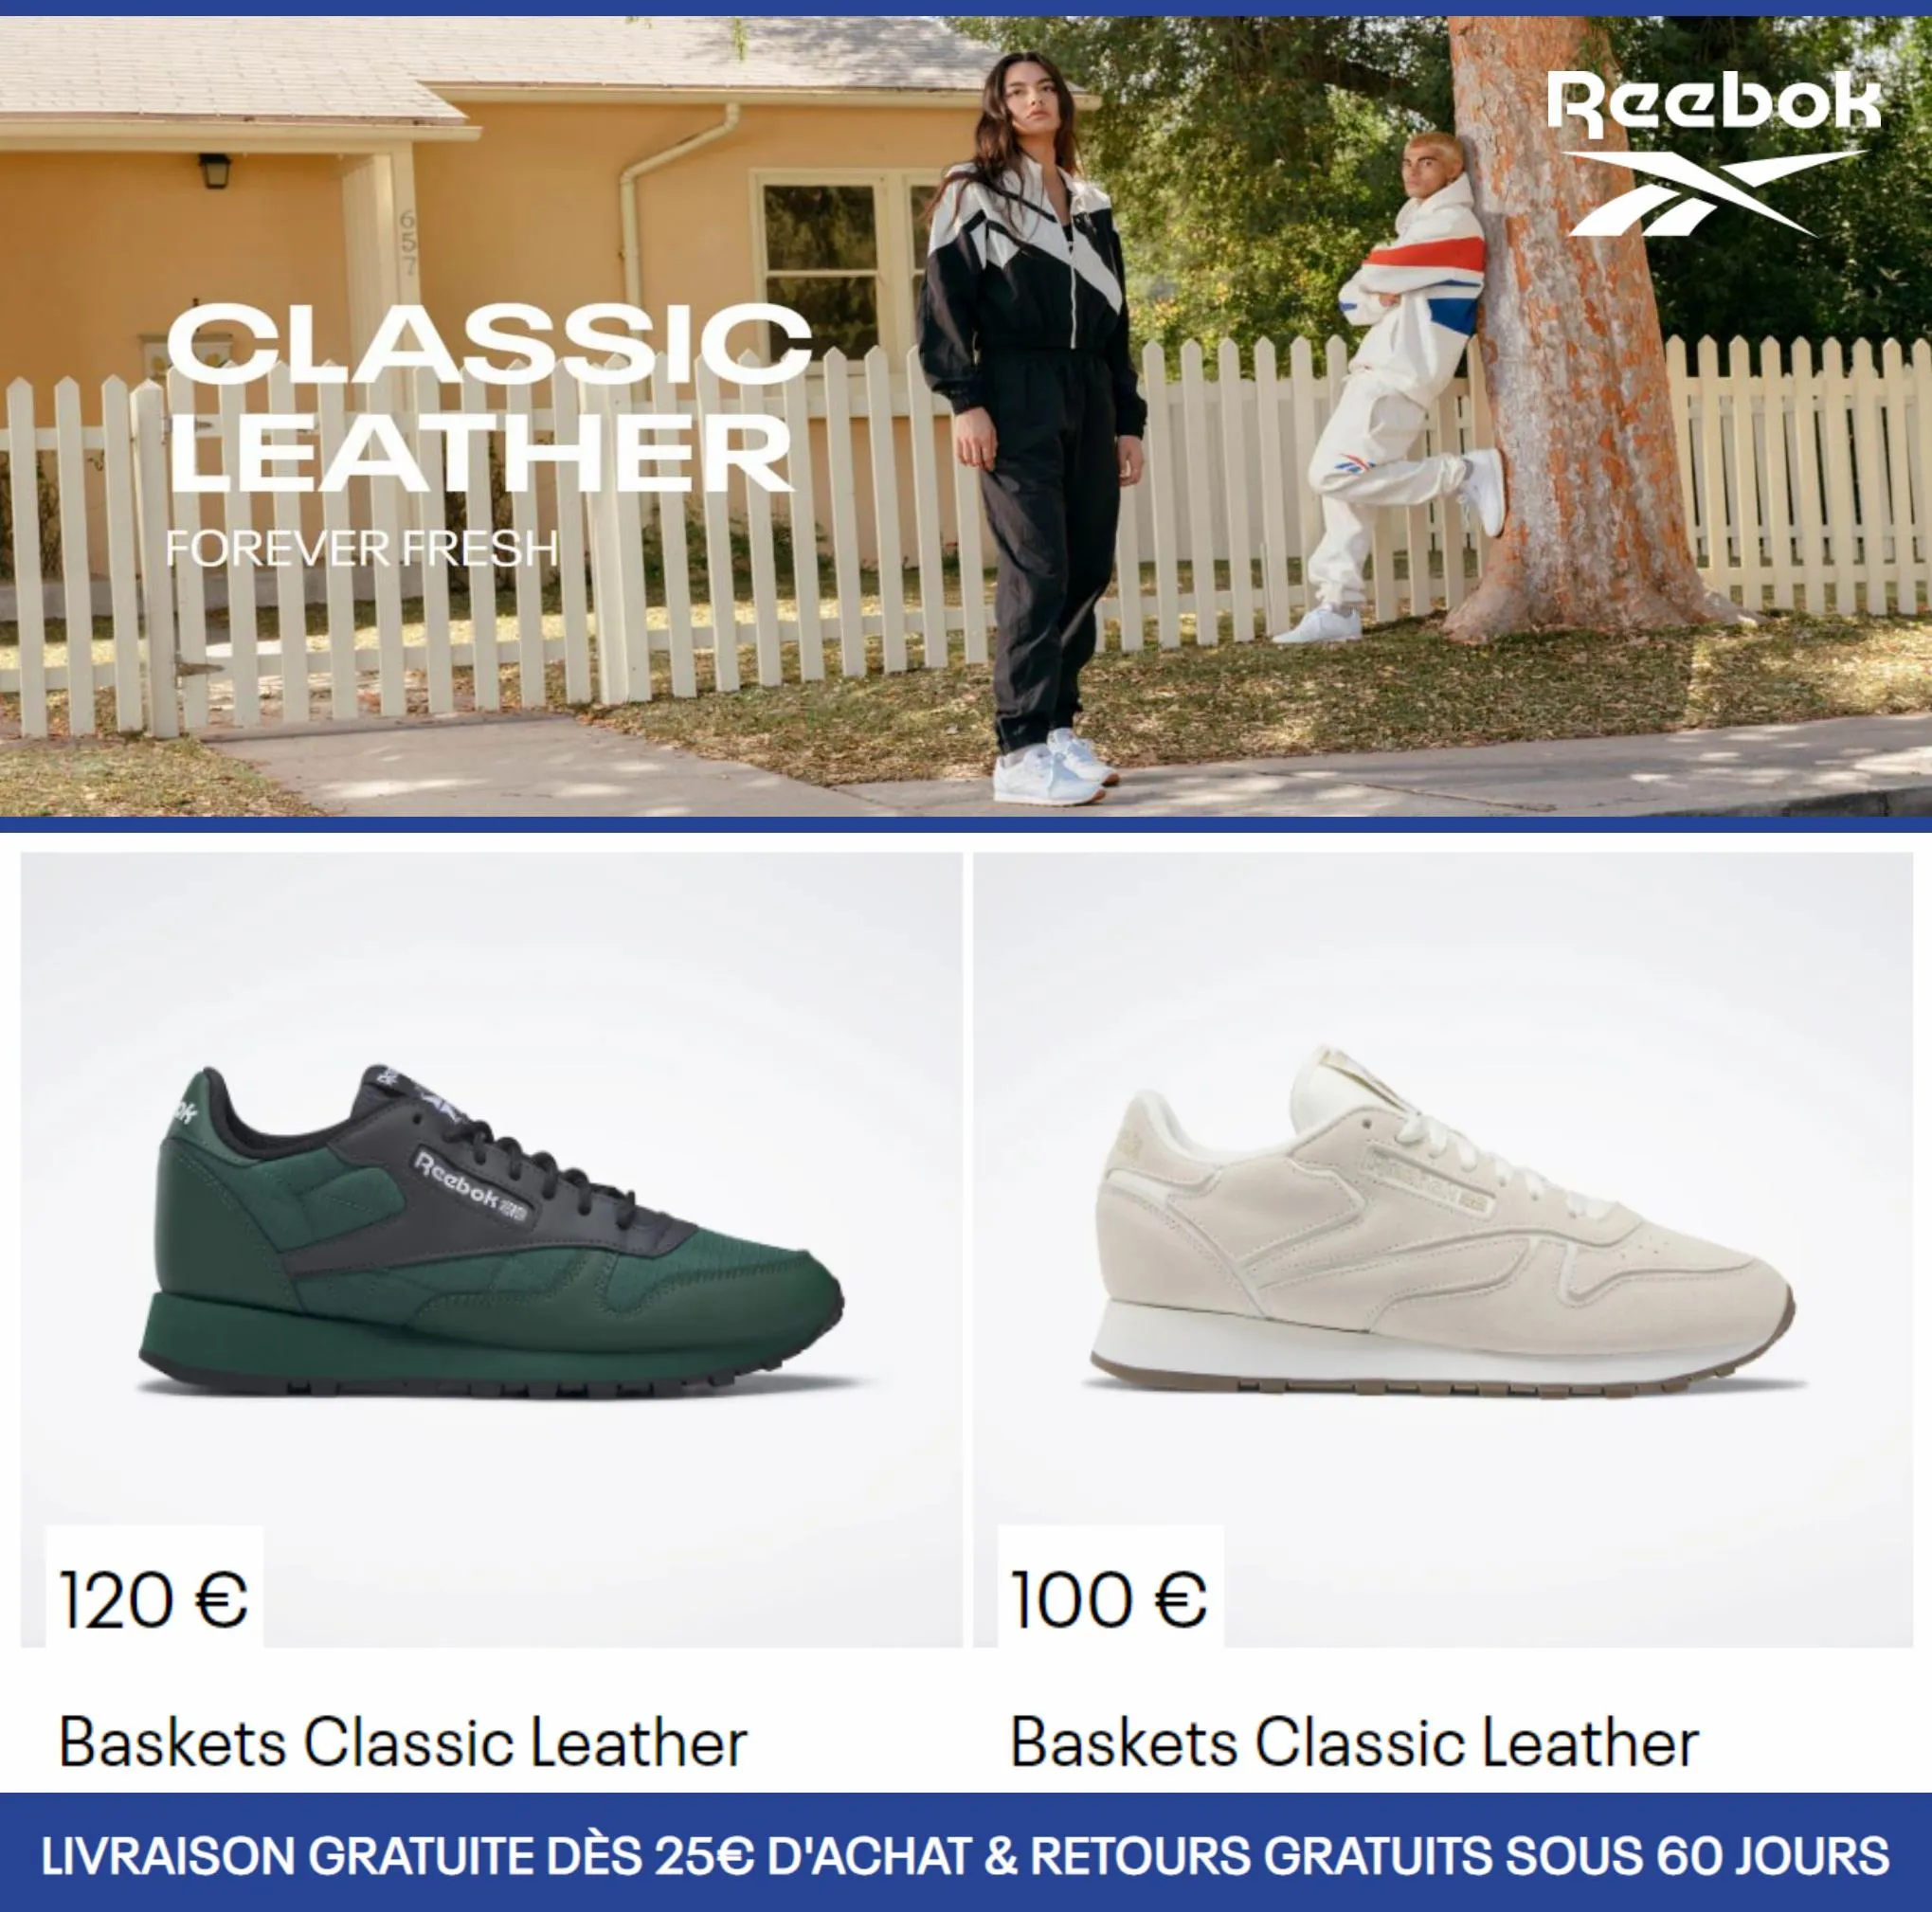 Catalogue Classic Leather, page 00003